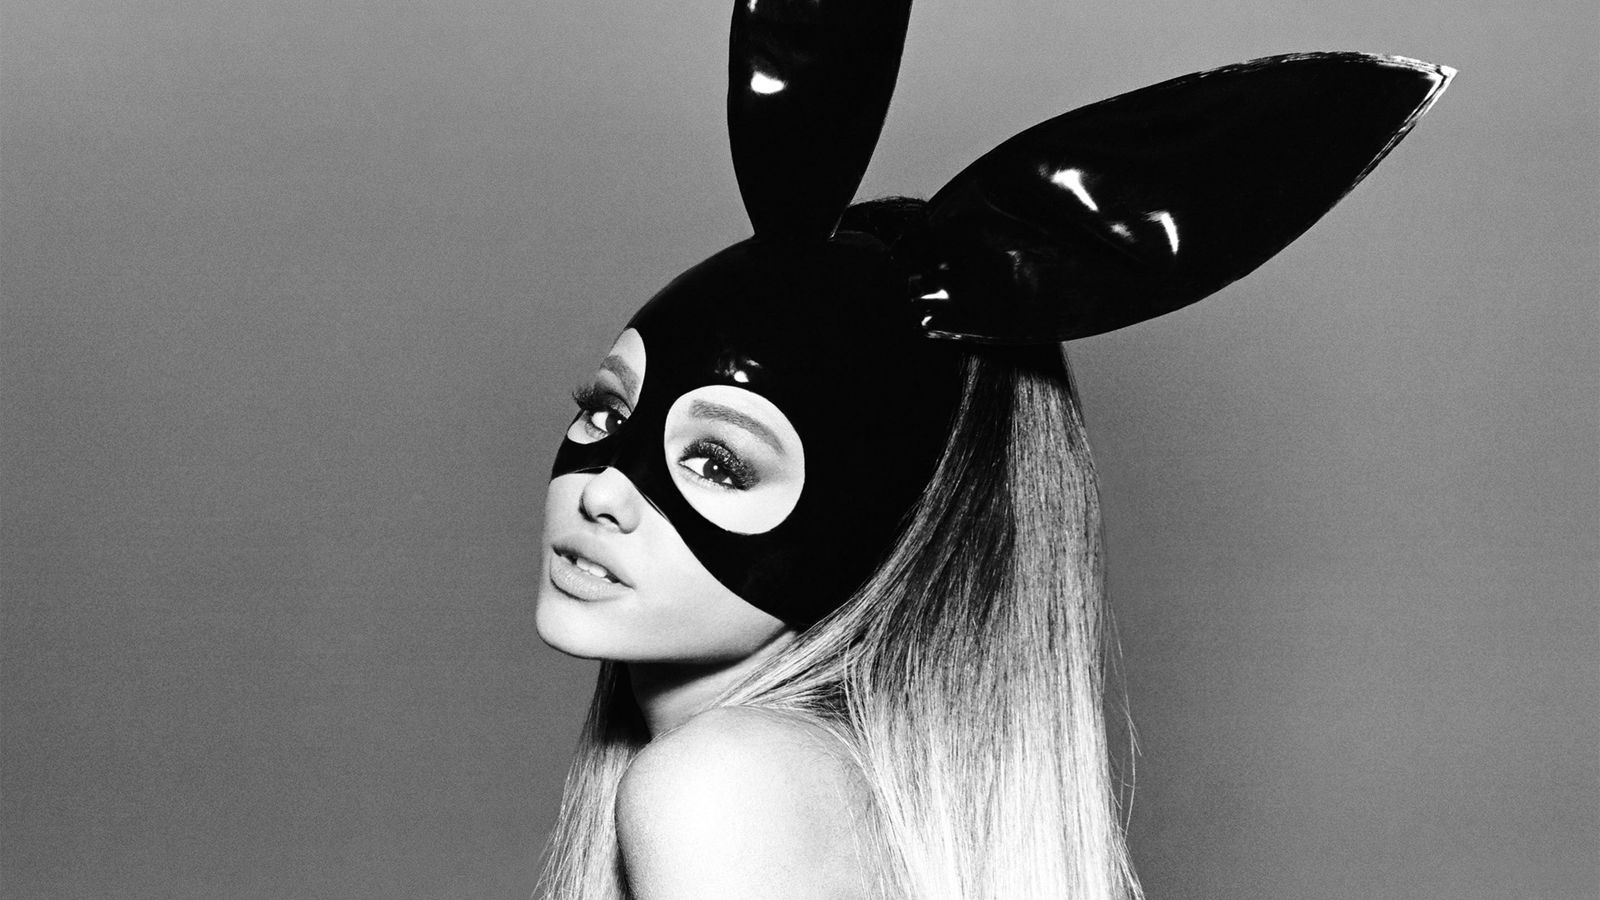 Ariana Grande to be guest character in Final Fantasy mobile game (update)